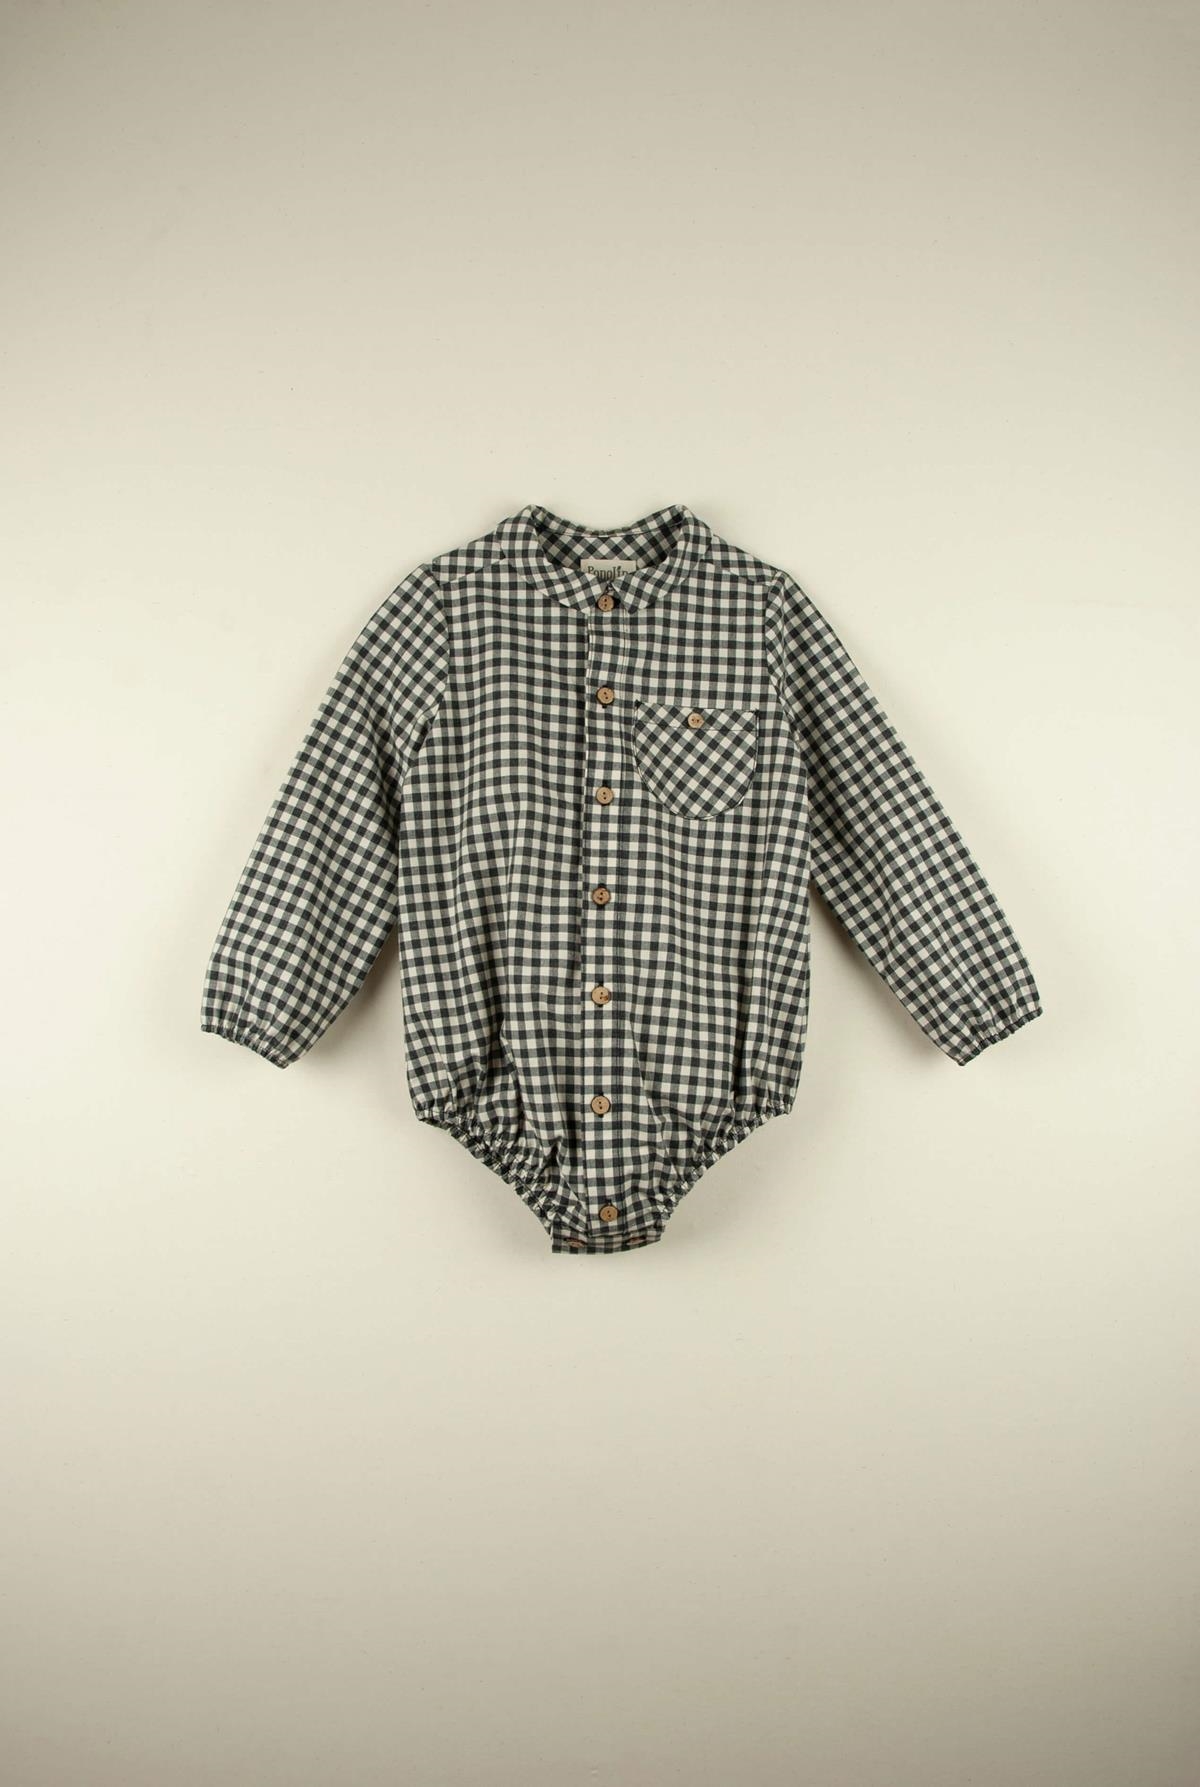 Mod.6.2 Shirt-style gingham romper suit | AW21.22 Mod.6.2 Shirt-style gingham romper suit | 1